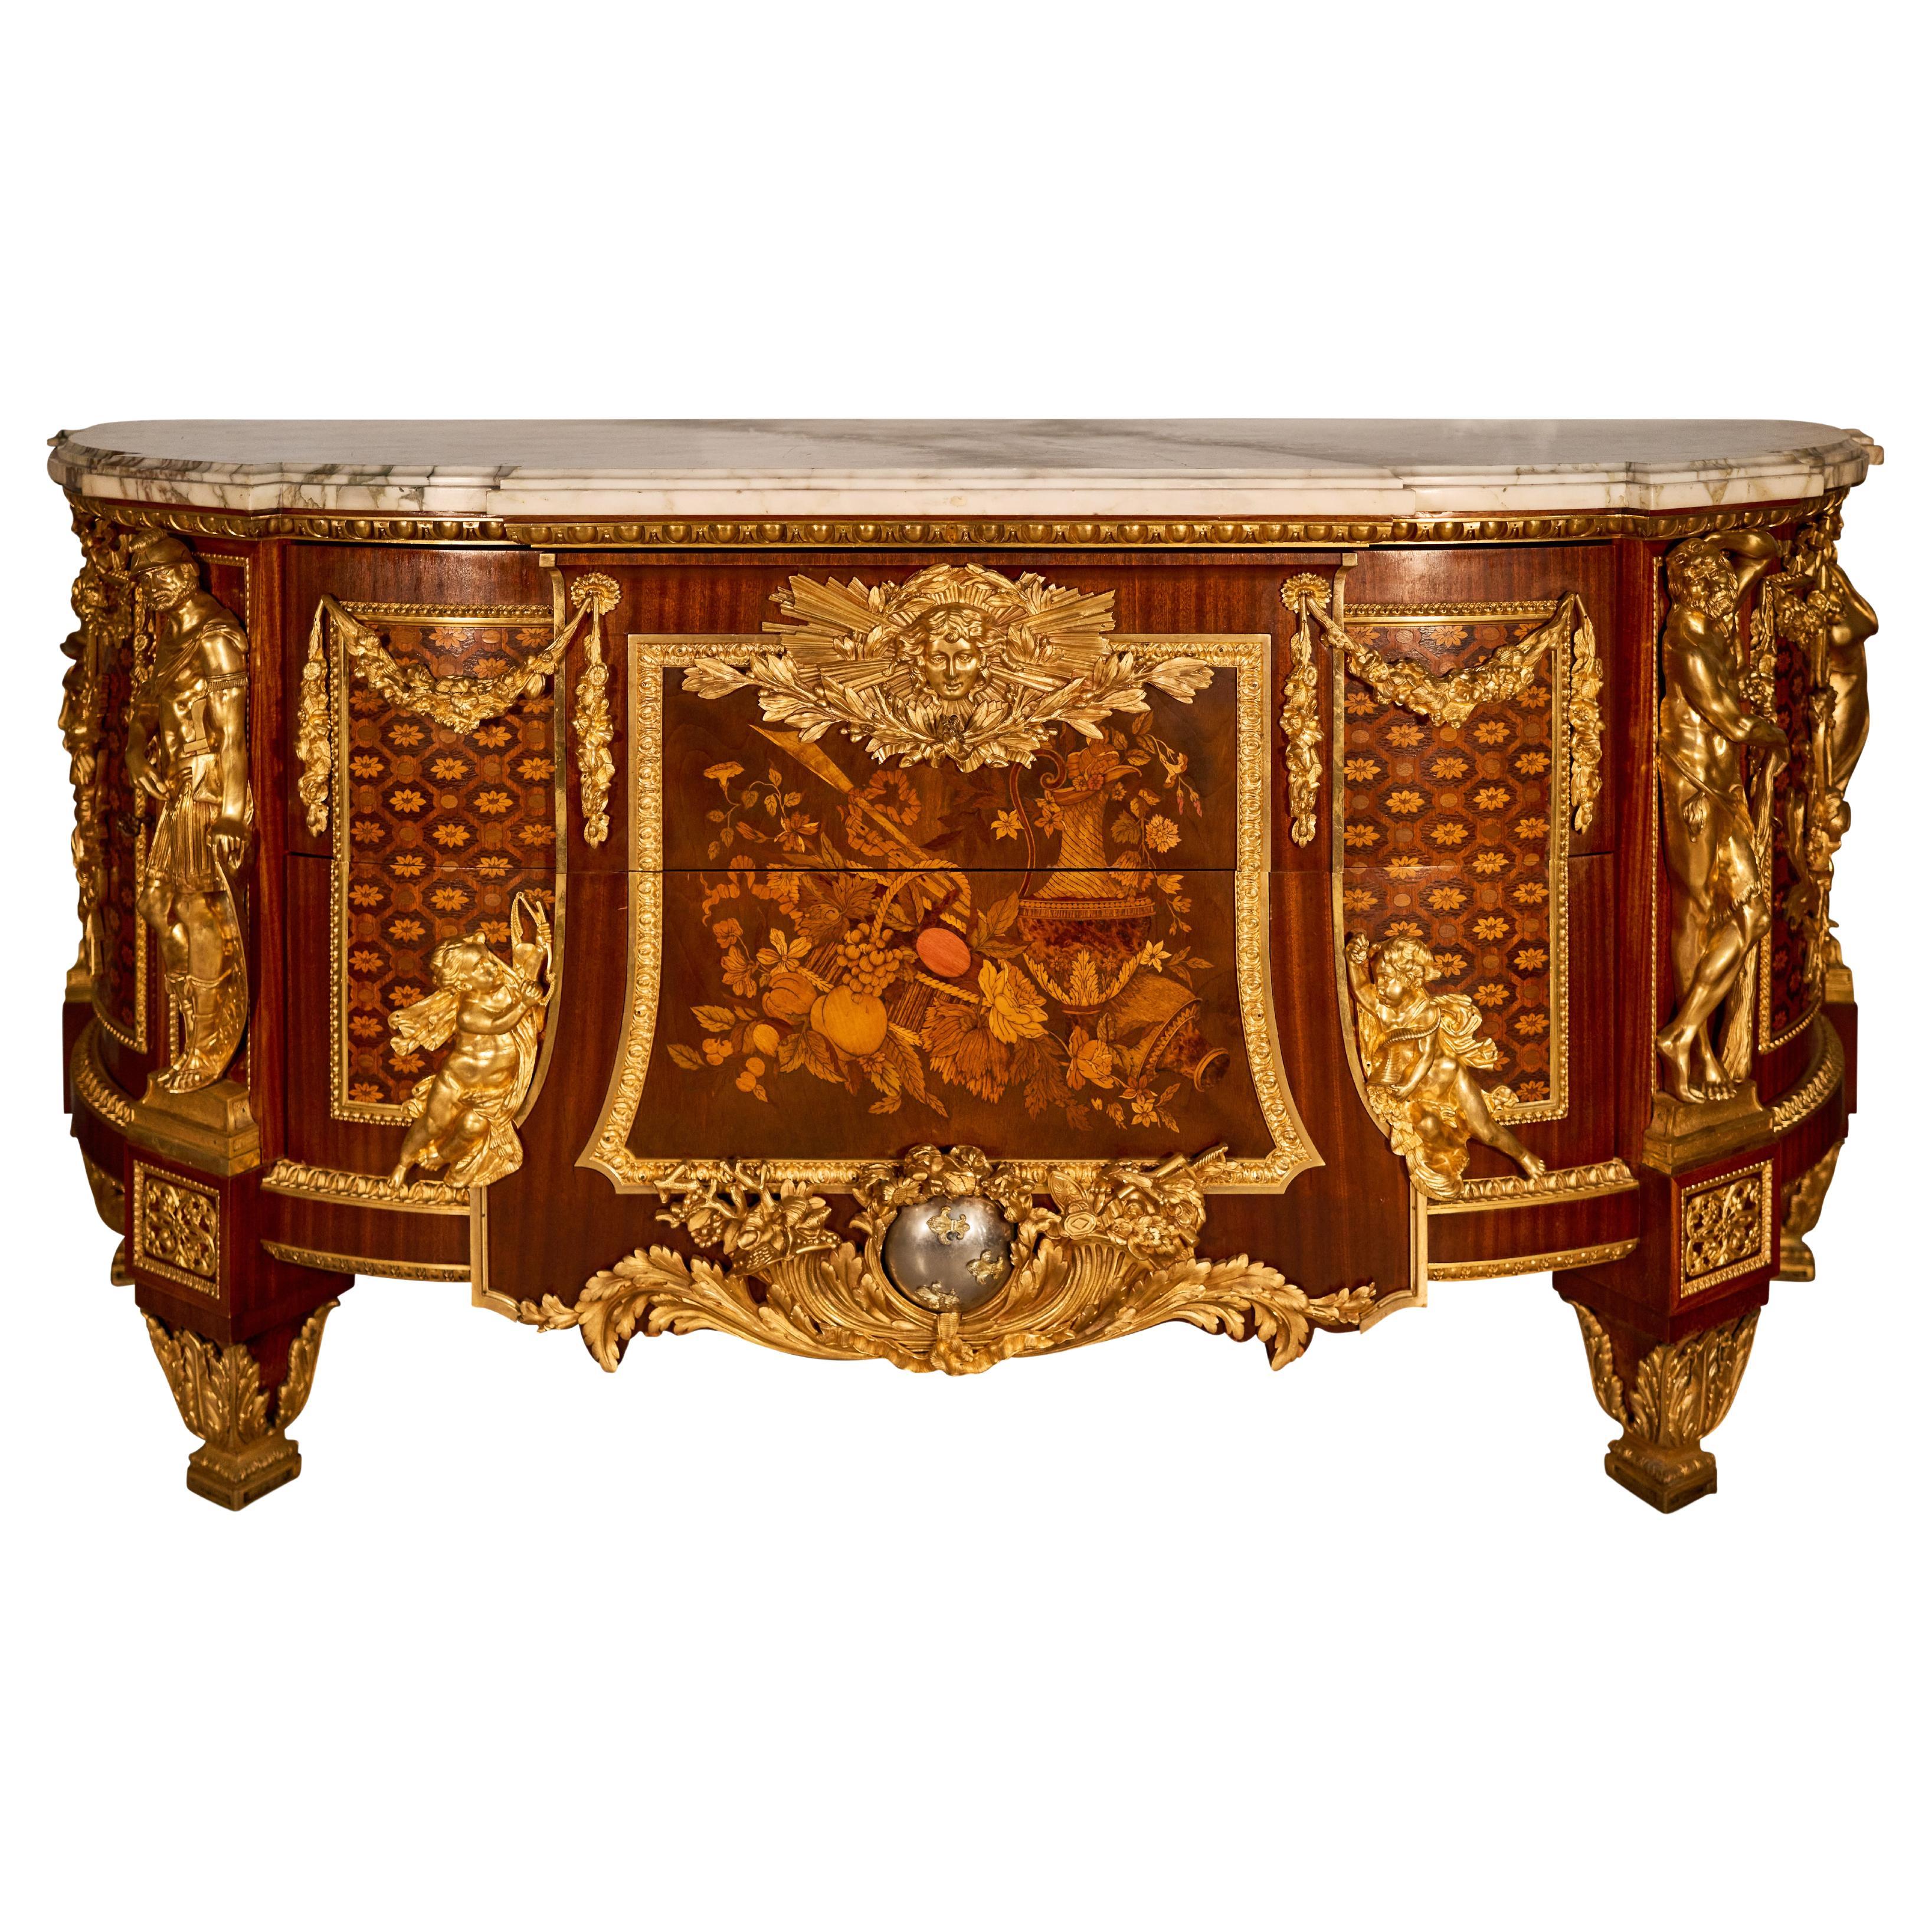 19th Century French Gilt-Bronze Mounted Commode after Jean-Henri Riesener For Sale